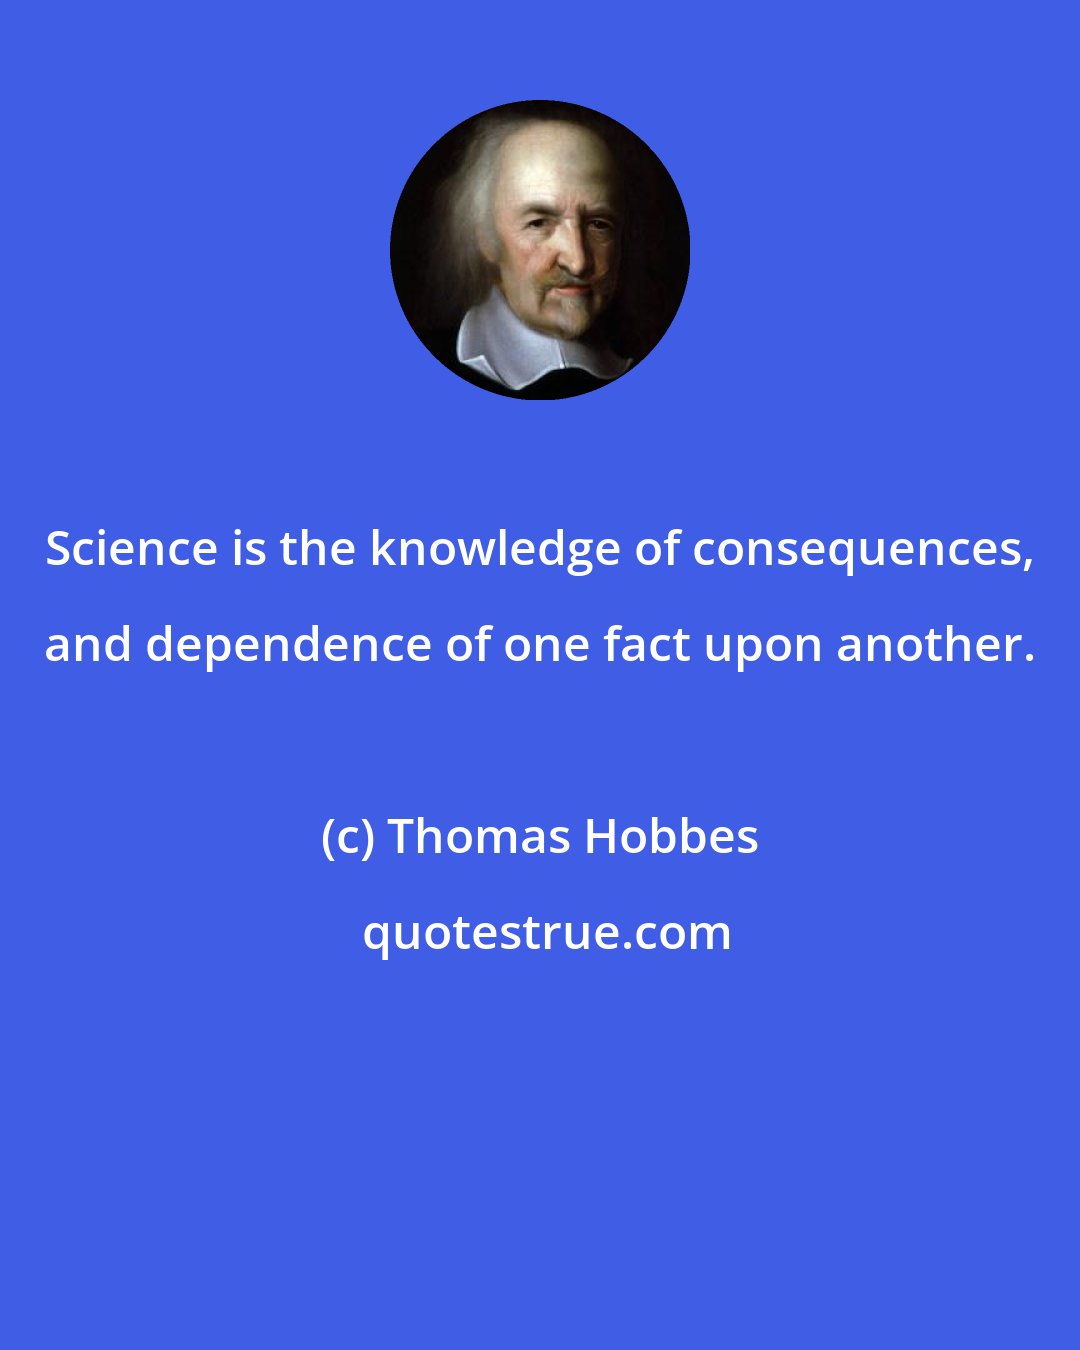 Thomas Hobbes: Science is the knowledge of consequences, and dependence of one fact upon another.